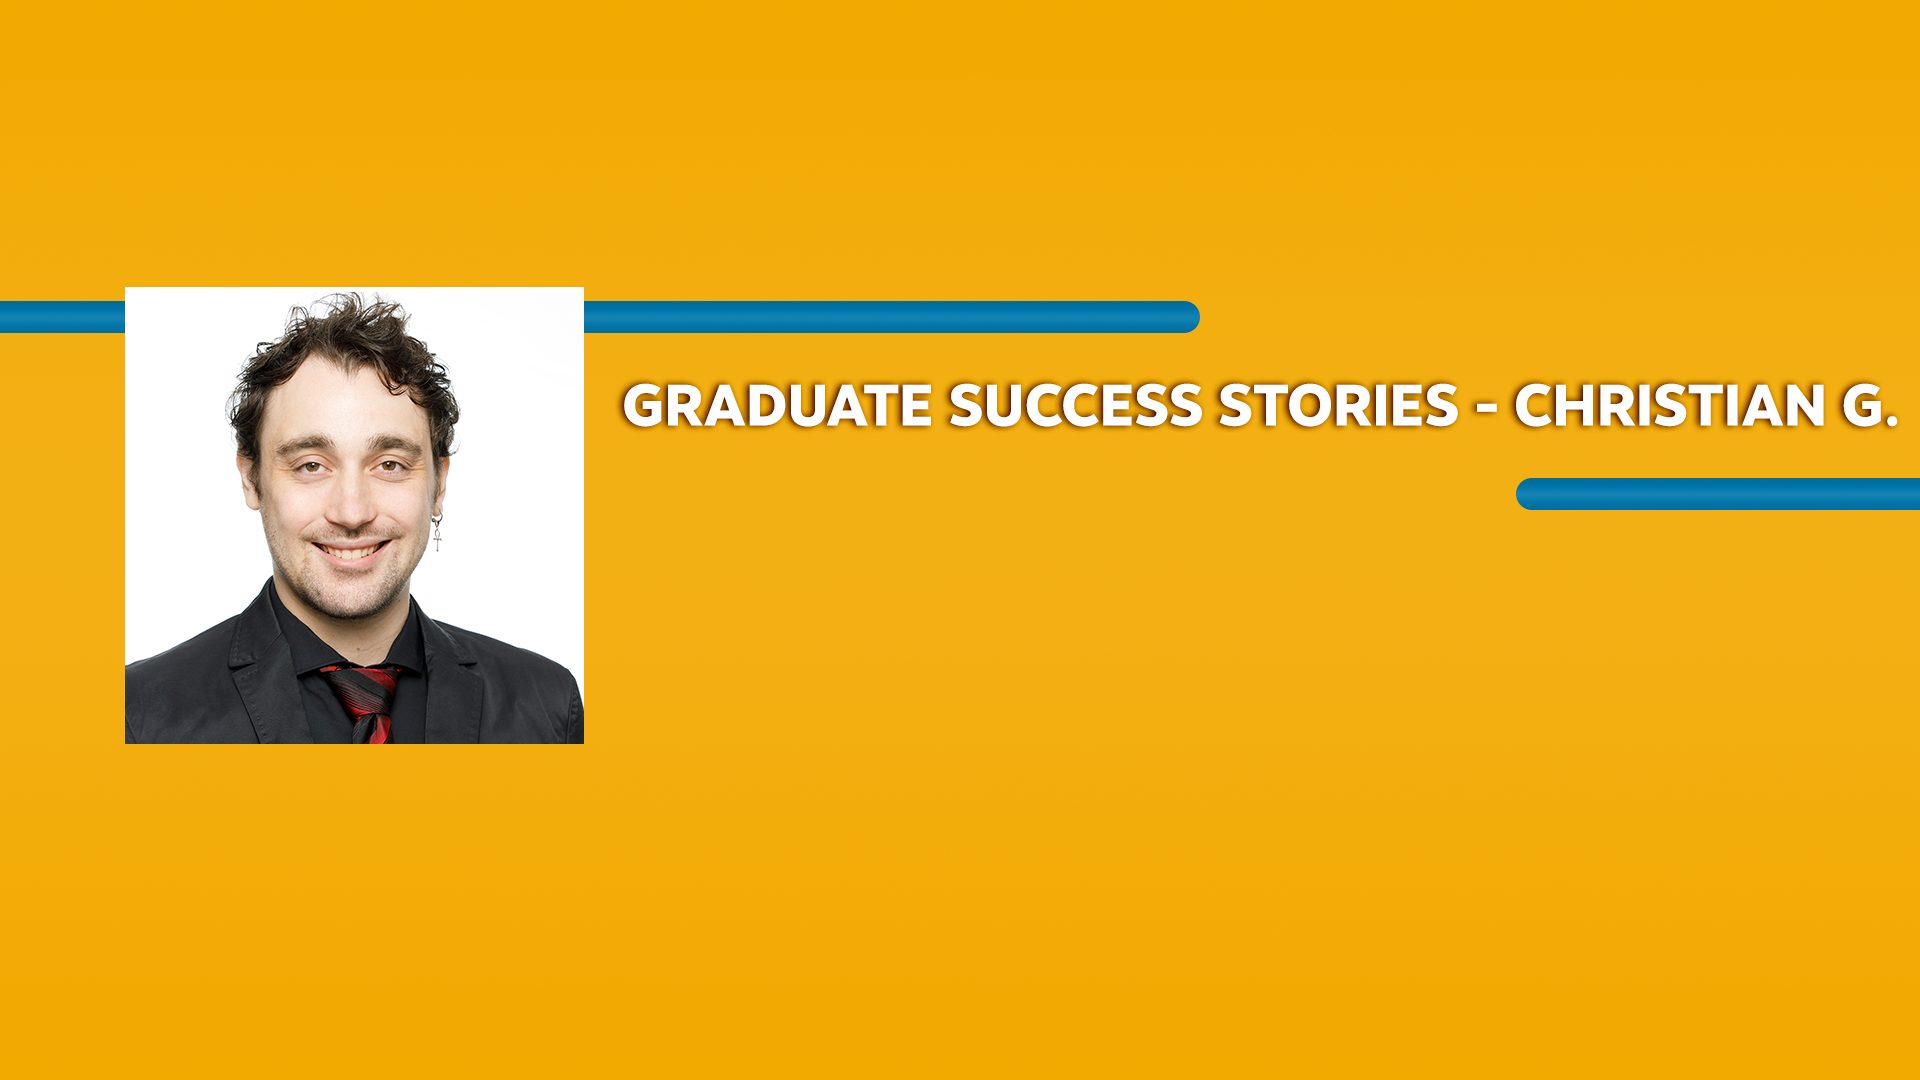 Orange rectangle with a picture of a man wearing a suit and Graduate Success Stories - Christian G. text in white font